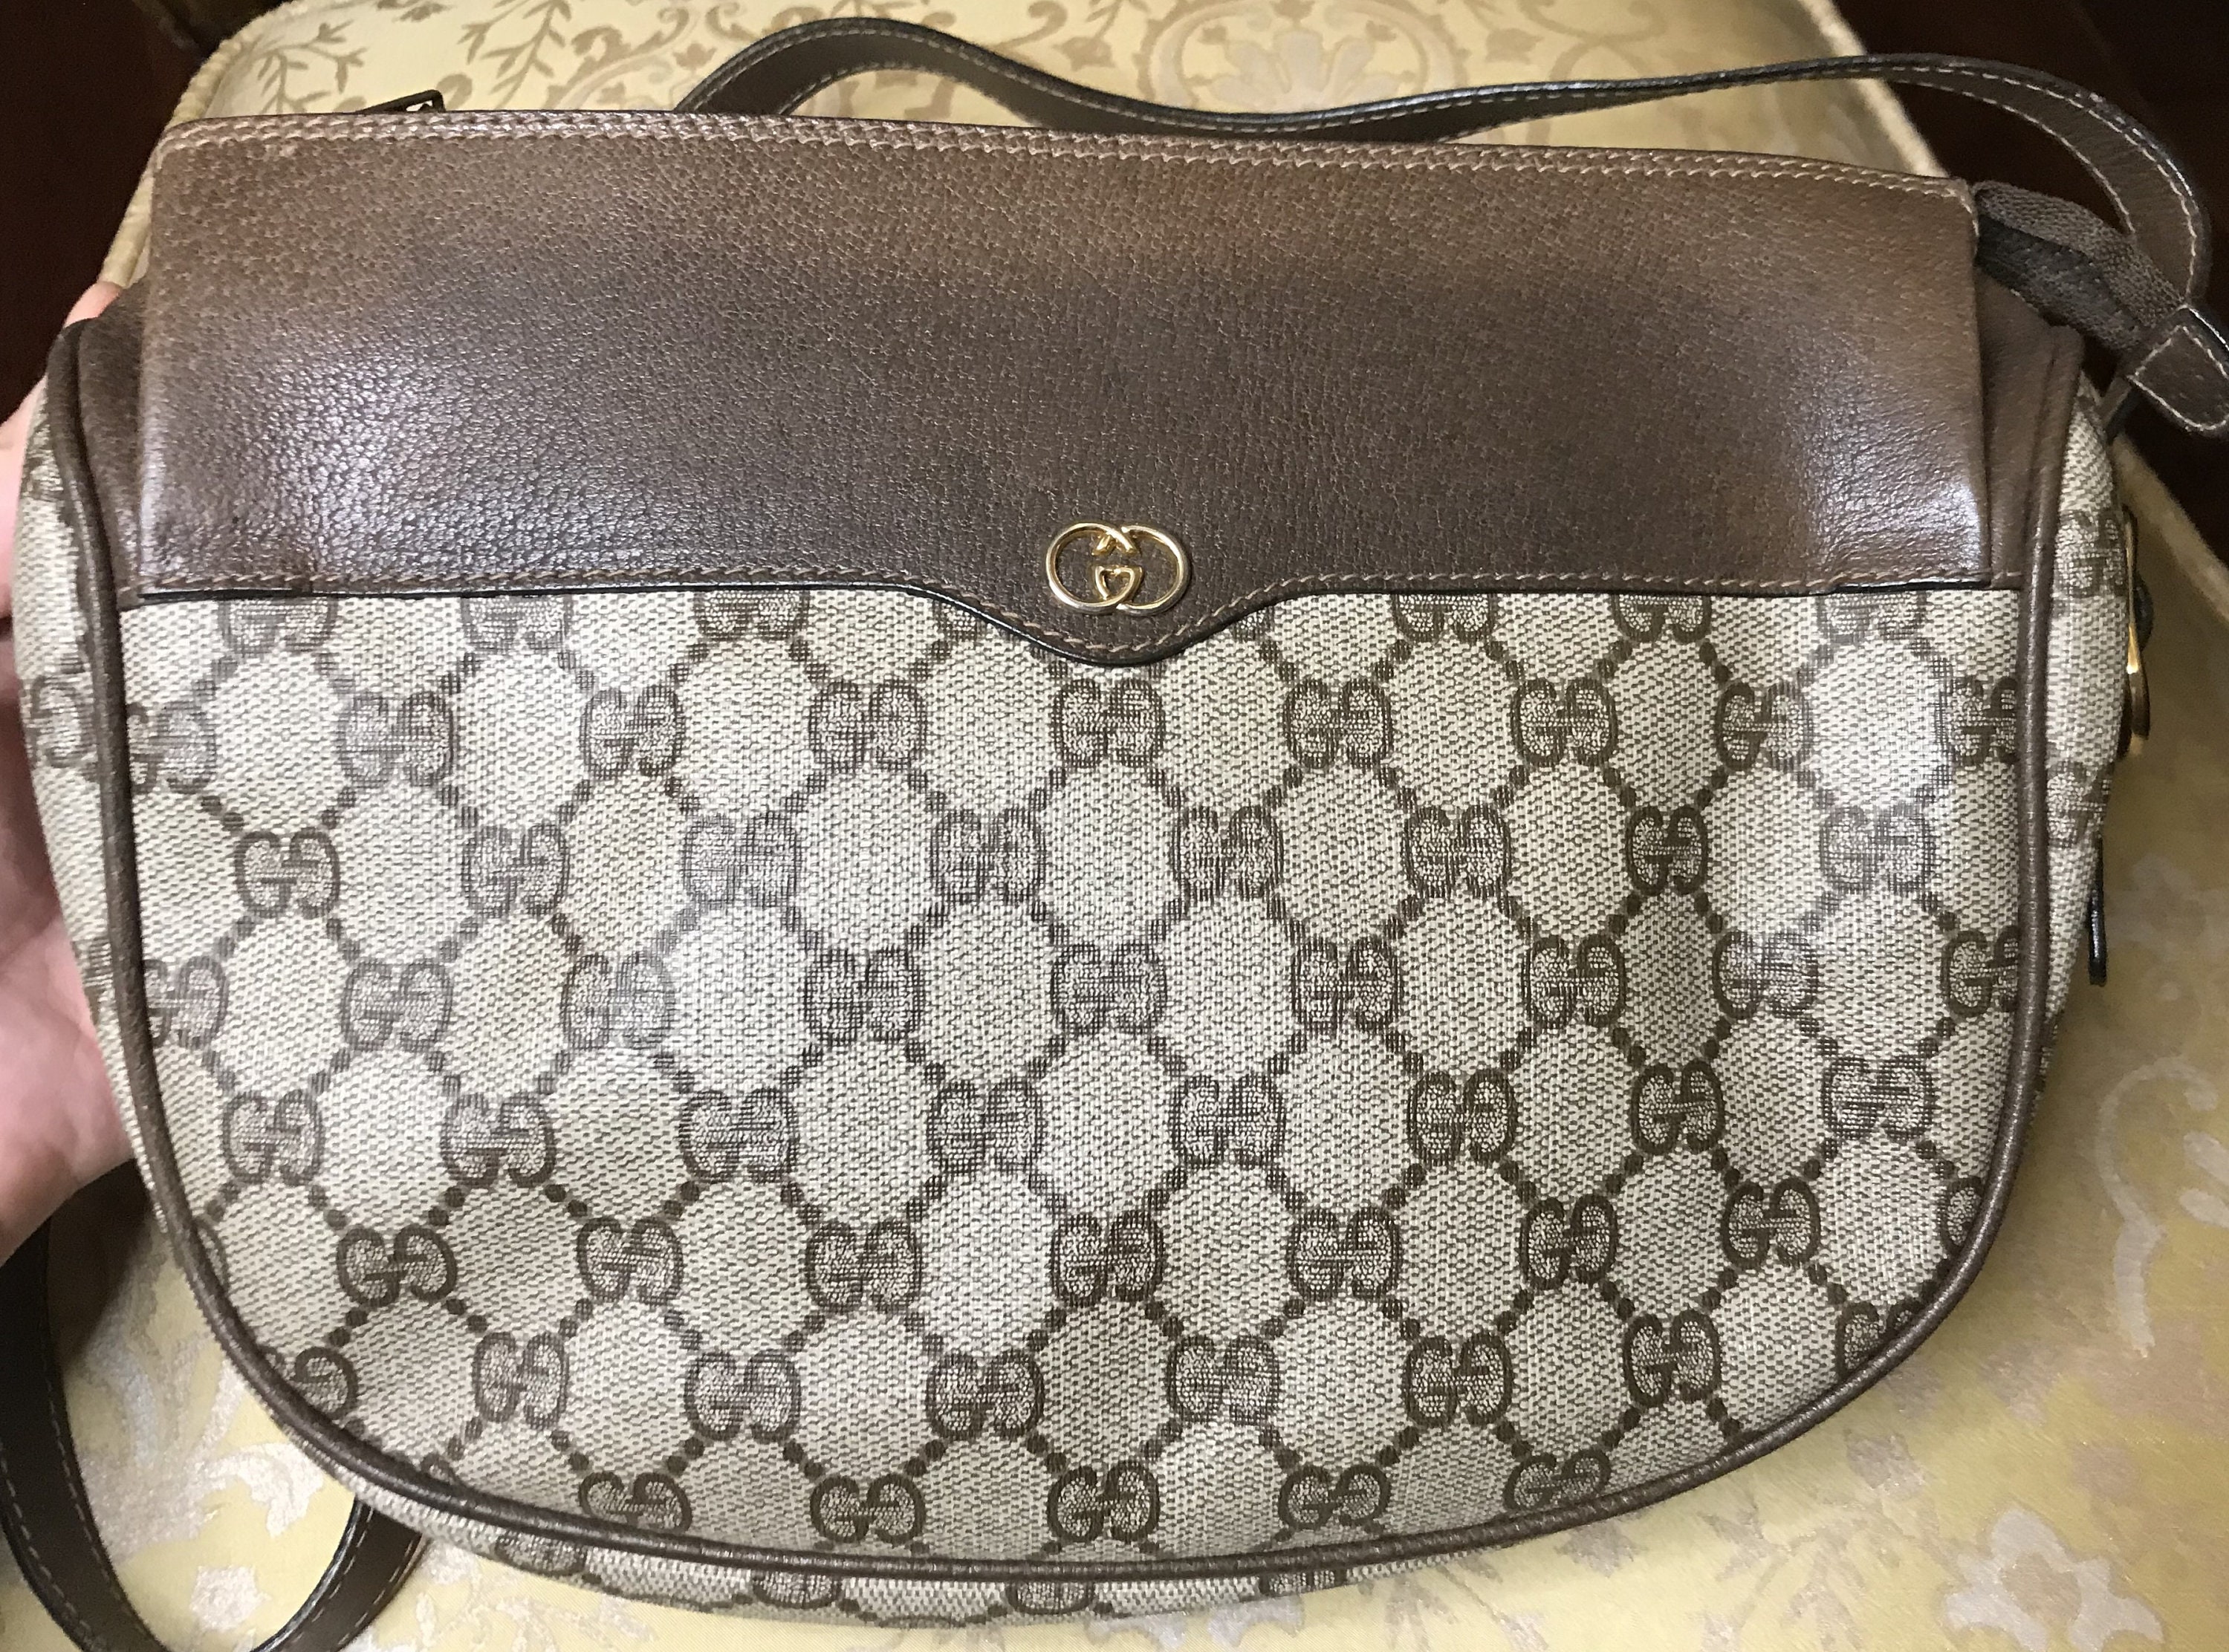 Gucci, Bags, Authentic Vintage Gucci Ophidia 98s Clutchcrossbody Bag Gg  Monogram W